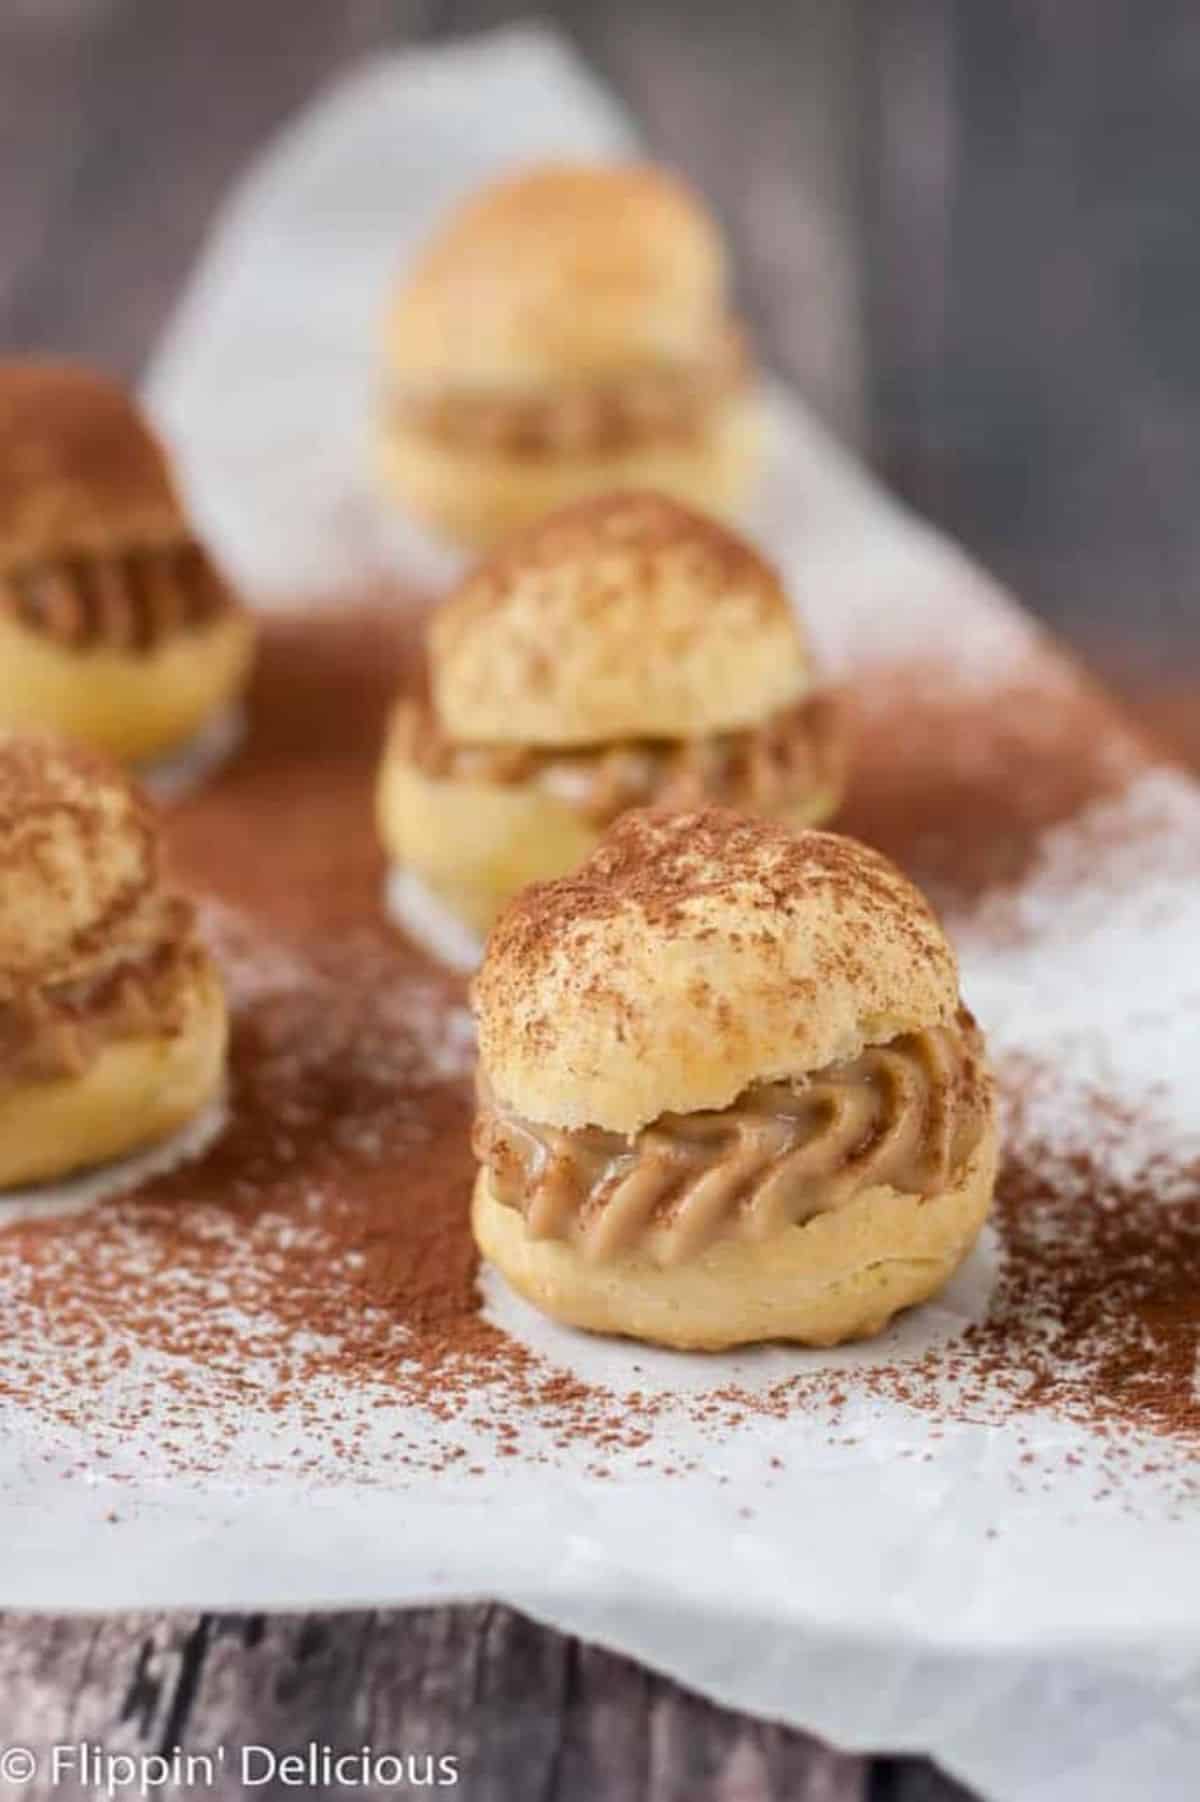 Flavorful Tiramisù Cream Puffs on a wooden table.